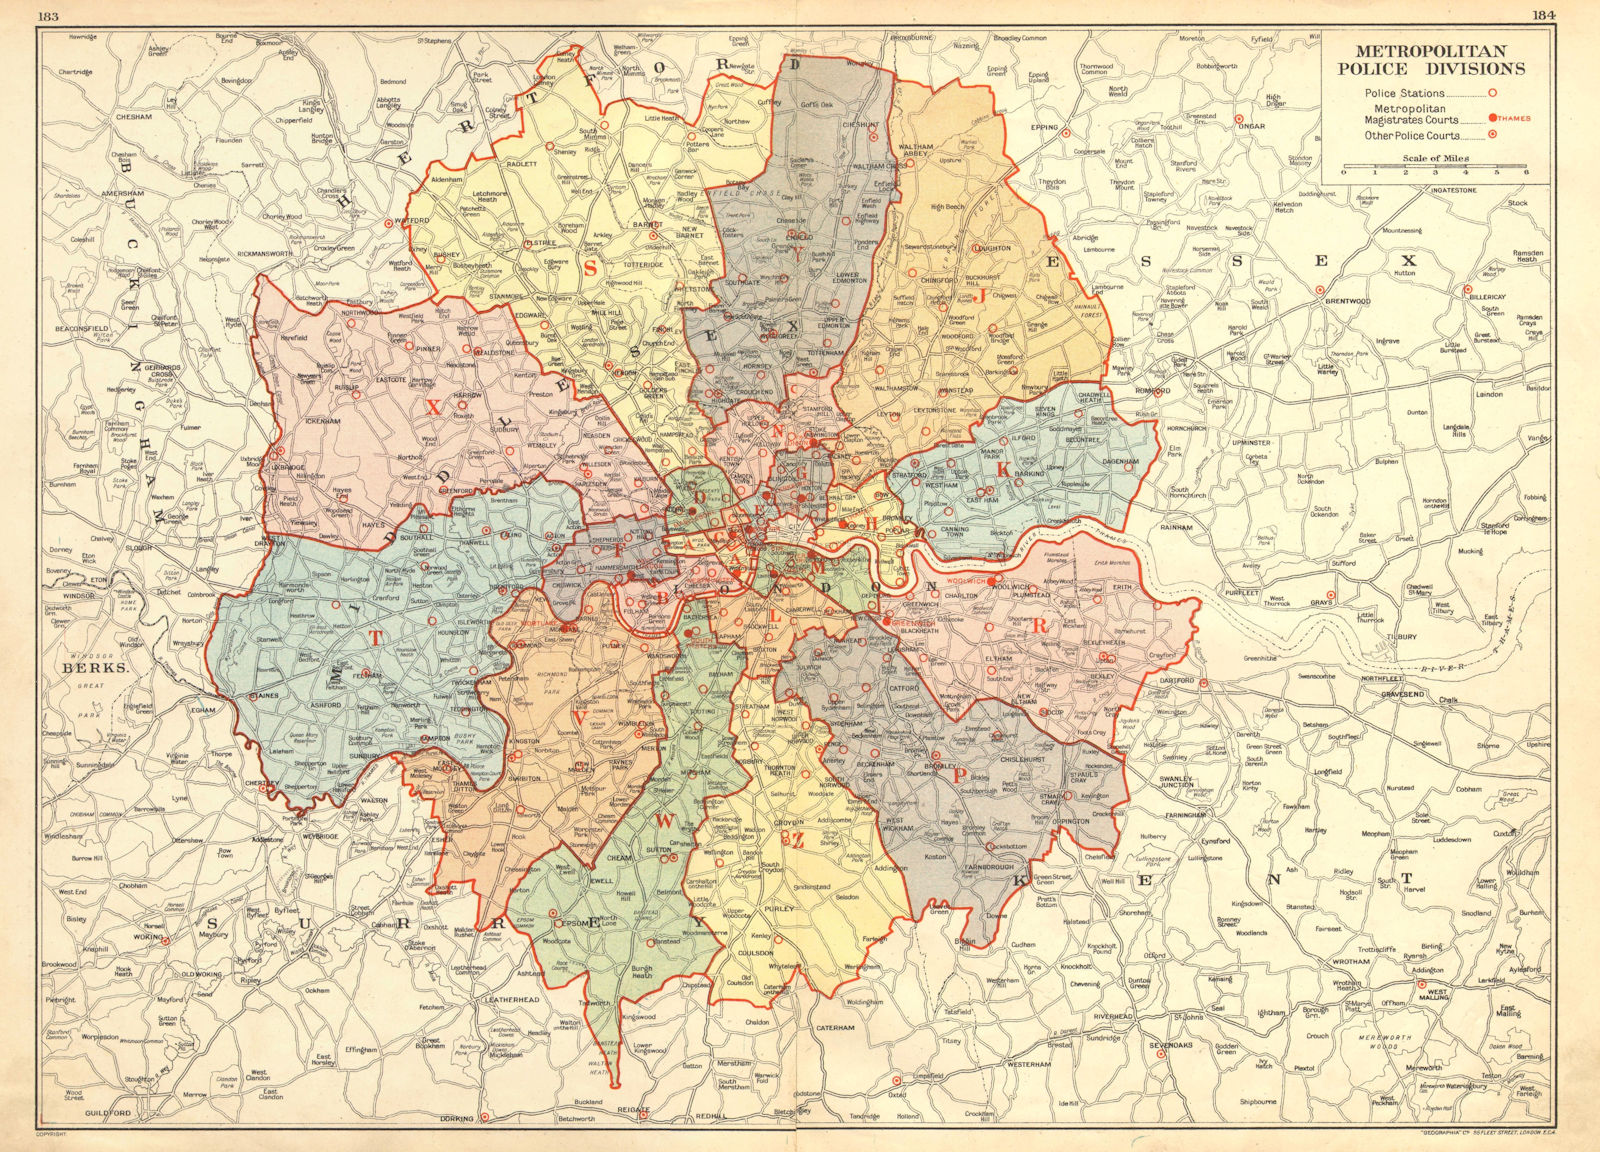 LONDON. Metropolitan Police Divisions. Stations. Magistrates Courts 1937 map